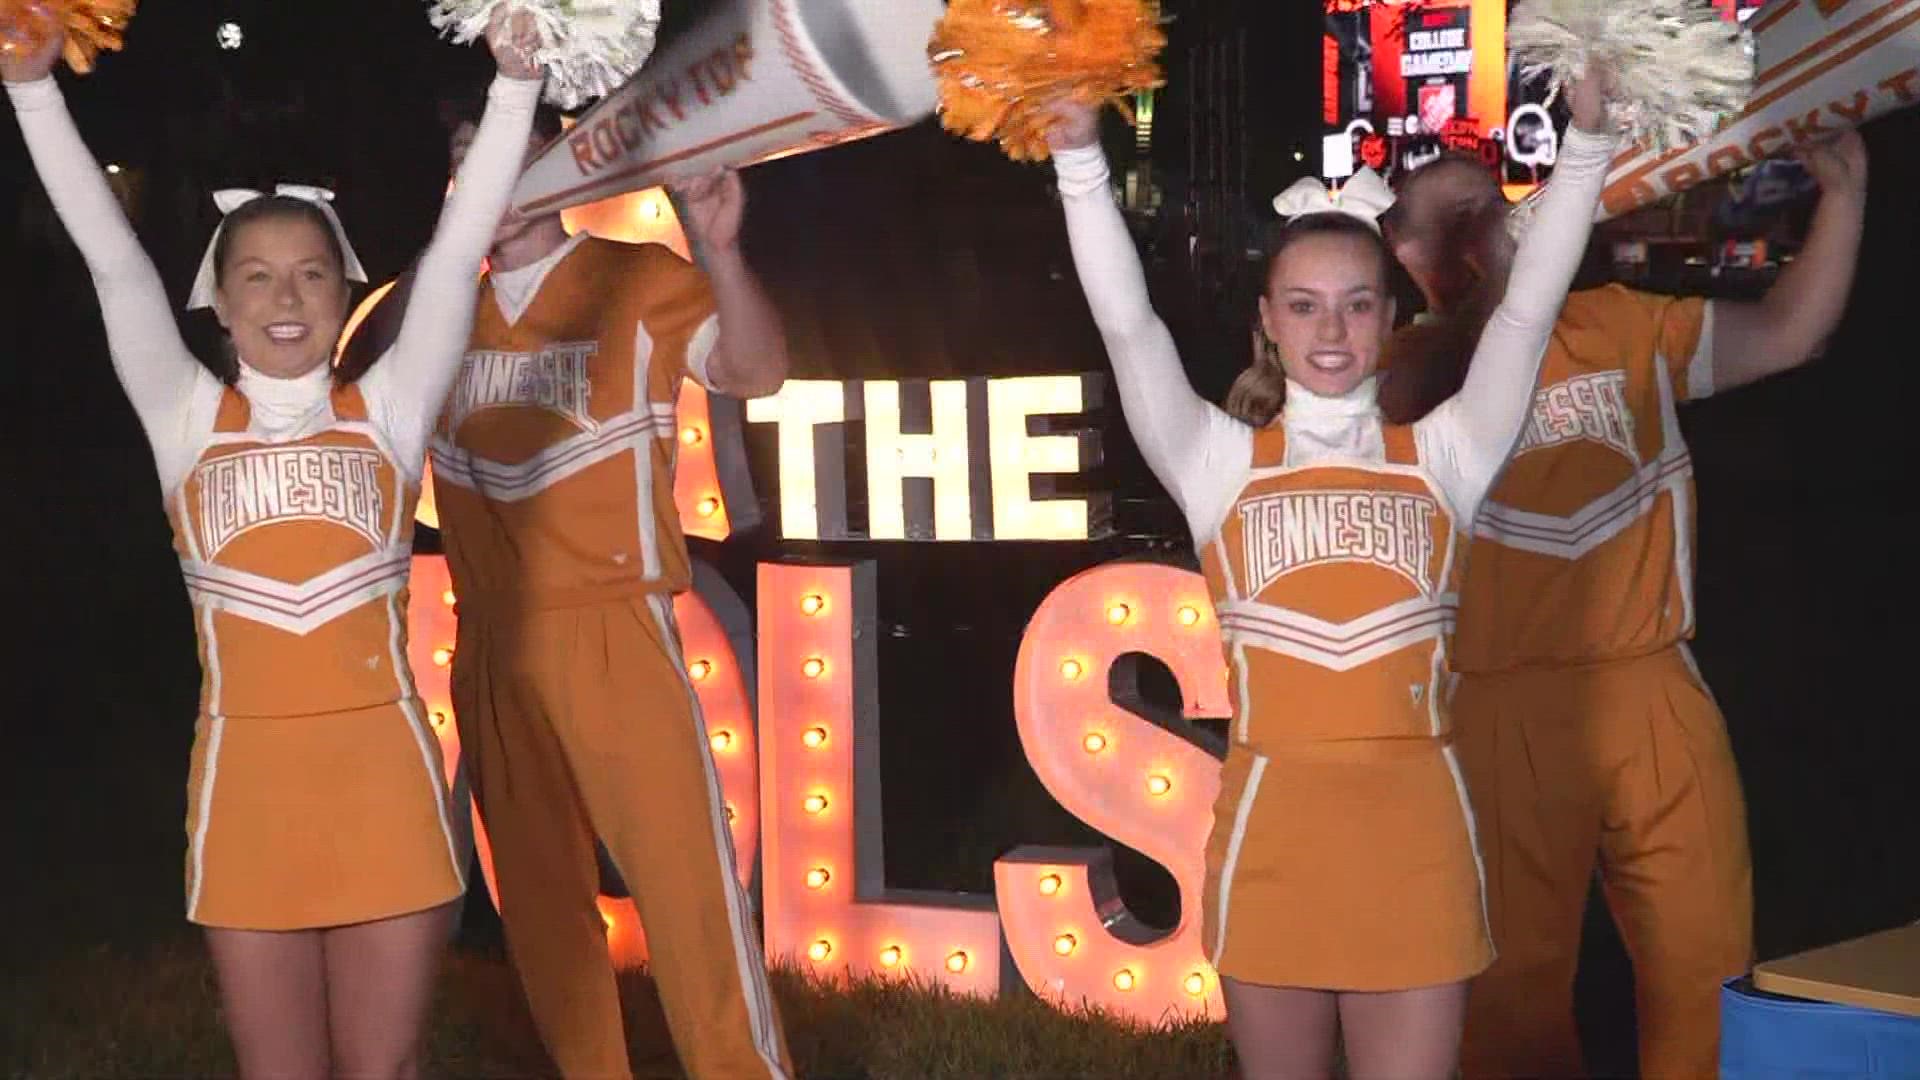 The Tennessee Cheerleaders have been practicing every day ahead of the big game on Saturday!